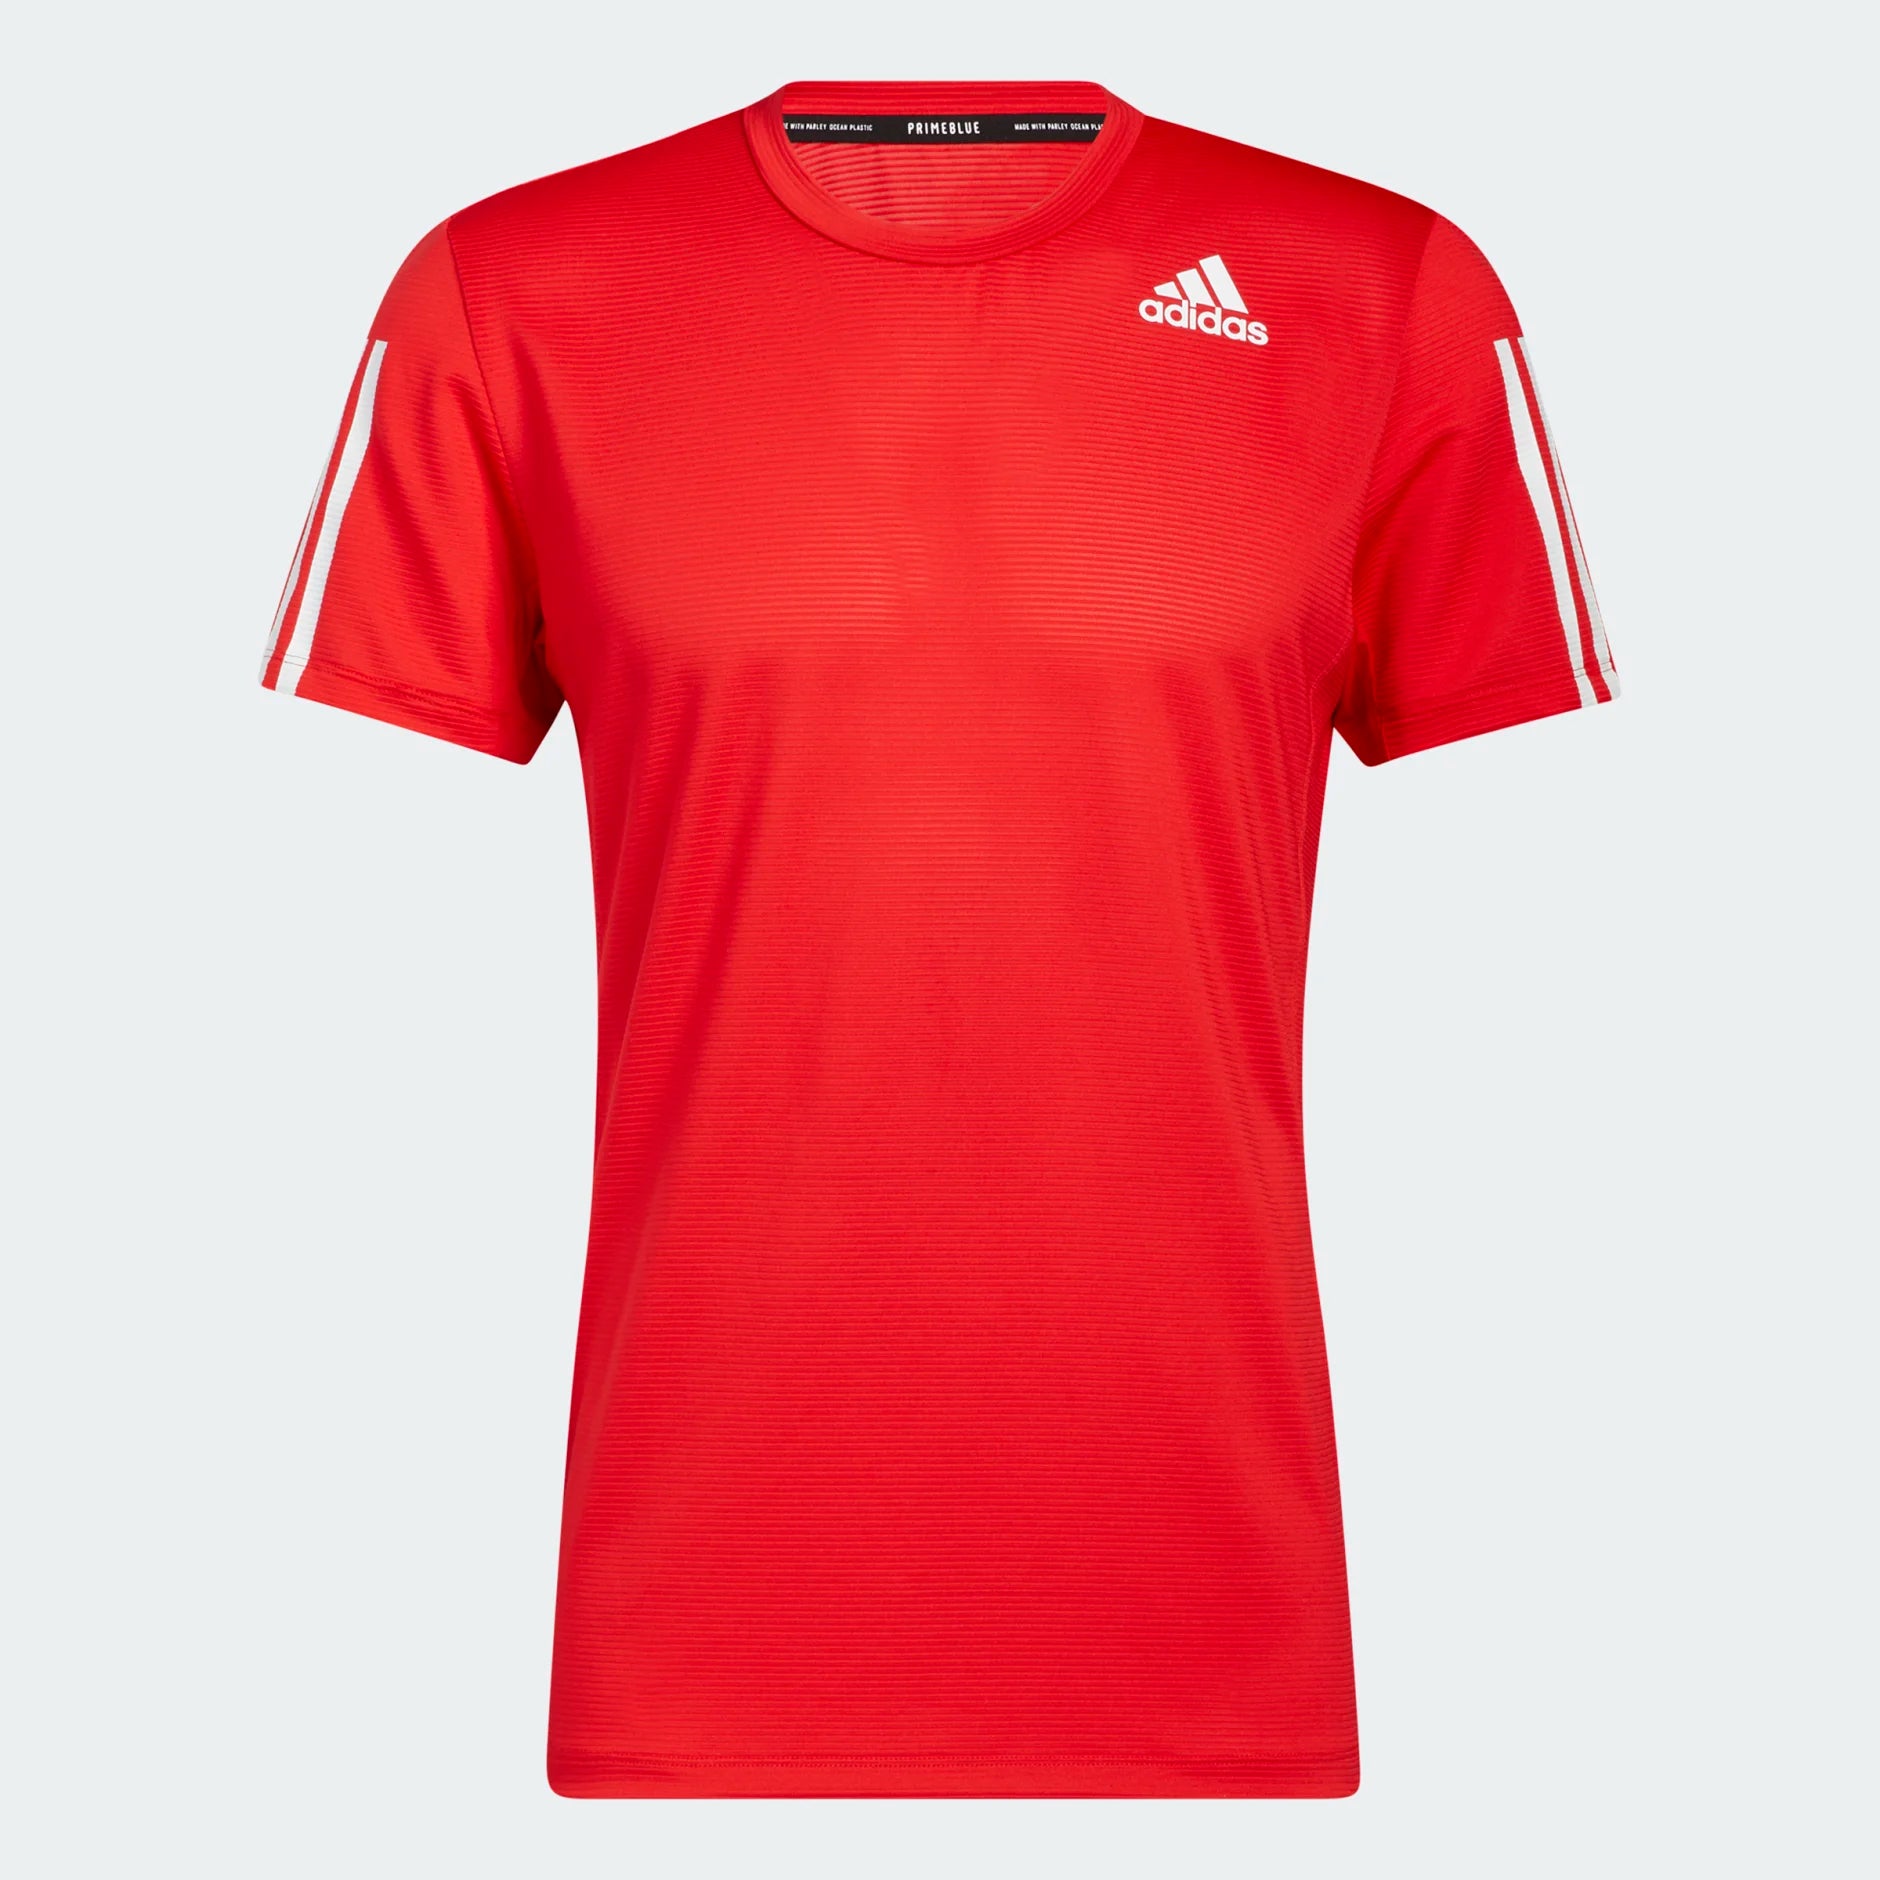 ADIDAS SALES COLLECTION – Page Online - Retail bCODE – Store Your 52 Fashion